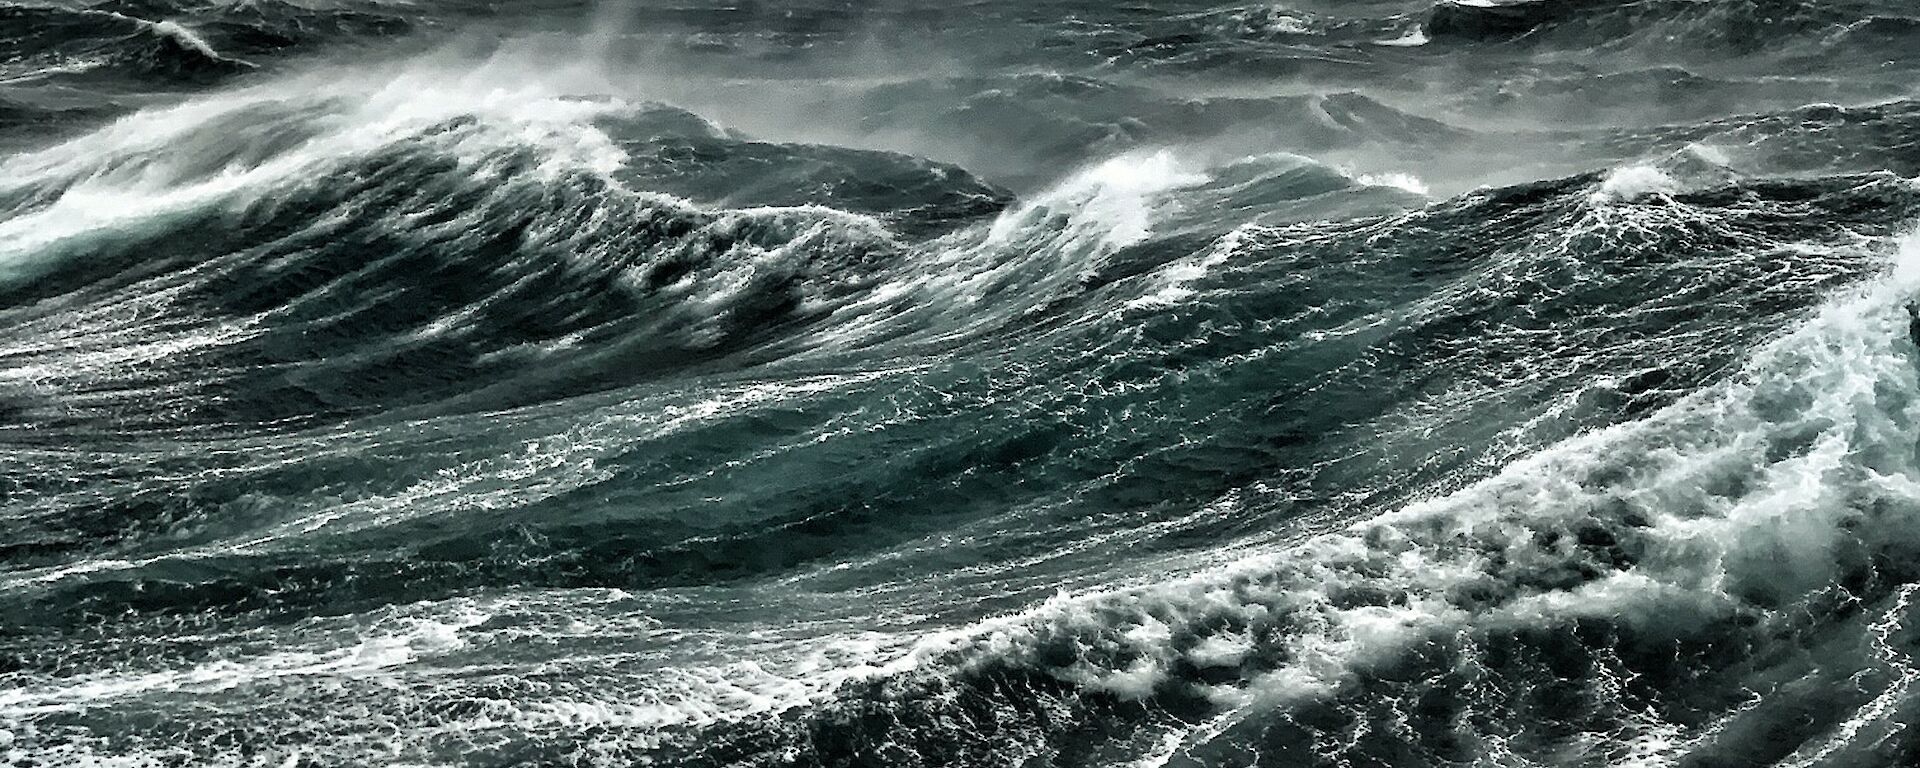 Choppy waves of the Southern Ocean